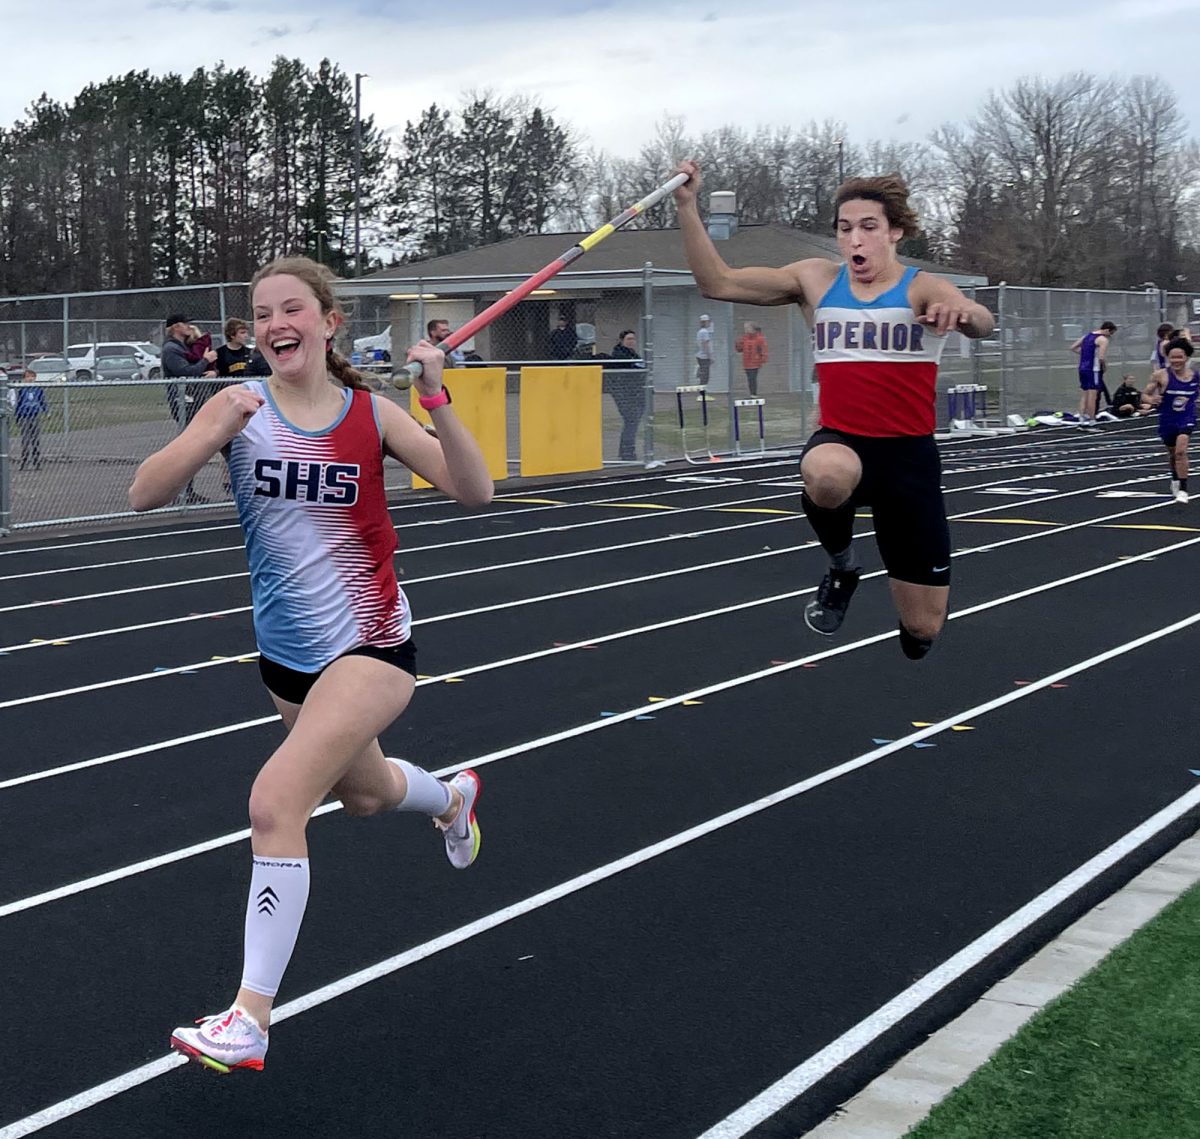 Captain+Micky+Little+%28right%29+recreates+a+Jack+Sparrow+run+while+he+runs+the+pole+vaulter+relay+with+freshman+Jette+Leopold+at+the+Cloquet+Relay+Meet+on+April+30%2C+2024.+The+two+proudly+took+the+lead+which+gave+Little+the+perfect+opportunity+to+be+silly.